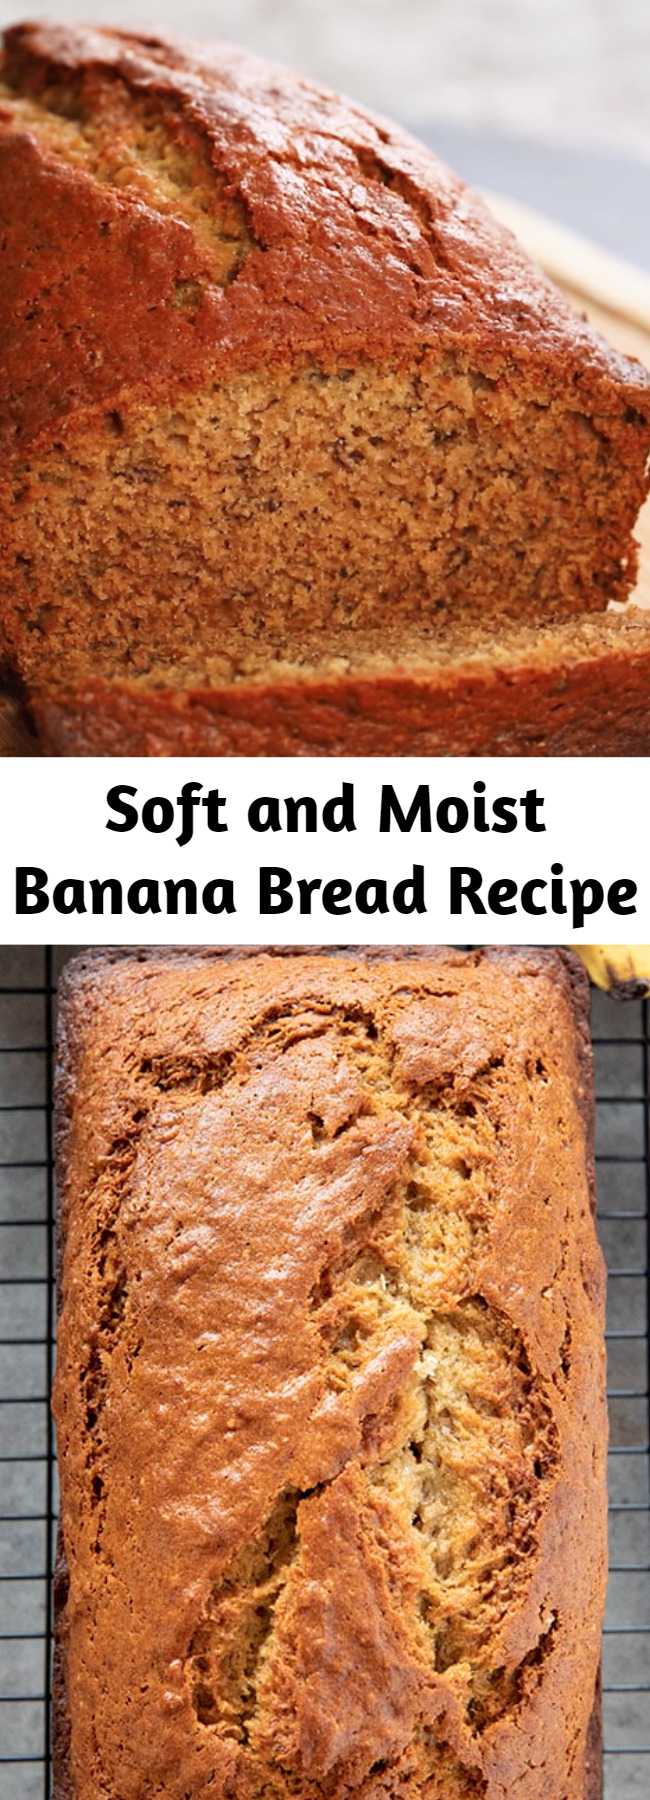 Soft and Moist Banana Bread Recipe - Best Banana Bread Recipe is so easy to make and super soft and moist! The very best way to use up overripe bananas this bread is tender and packed full of flavor!